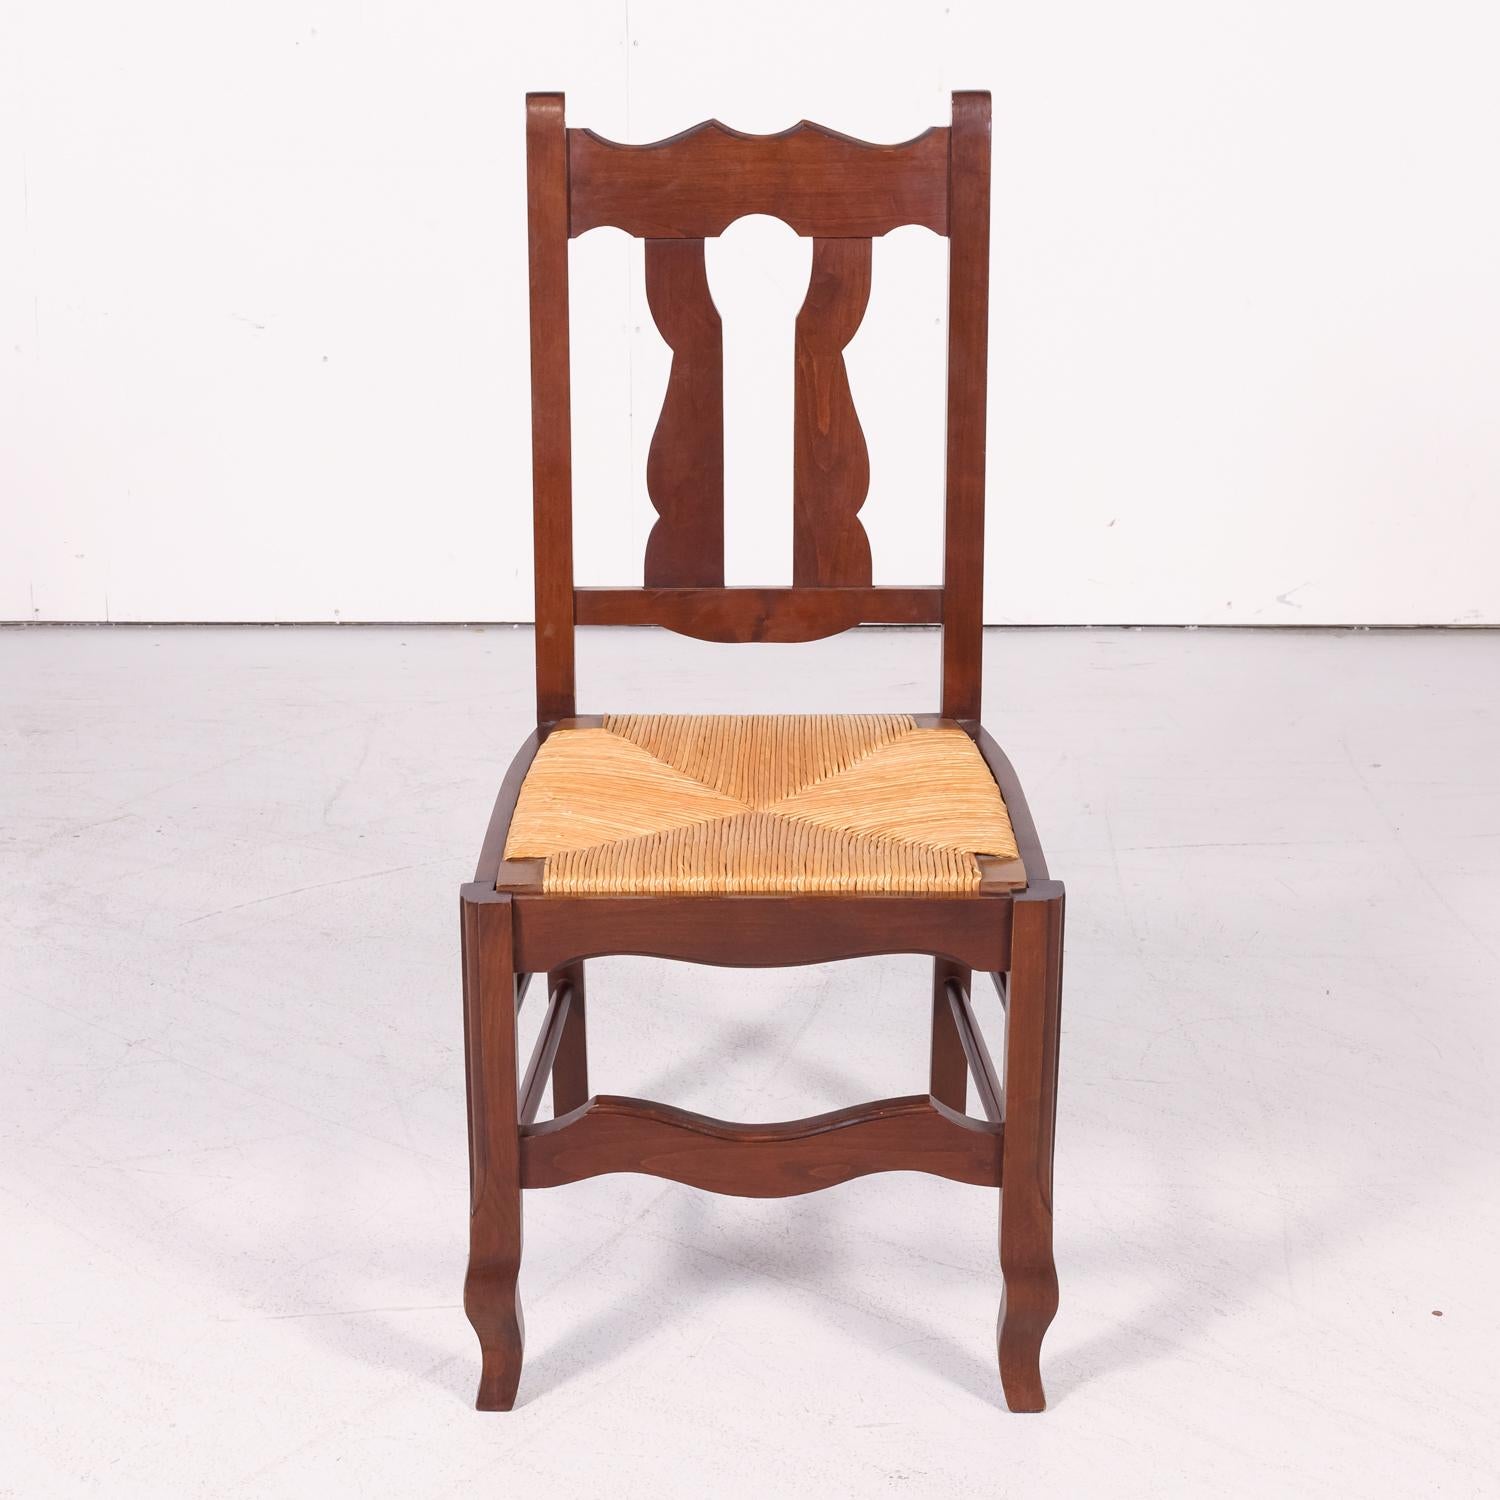 hand-carved antique dining chairs and seating styles